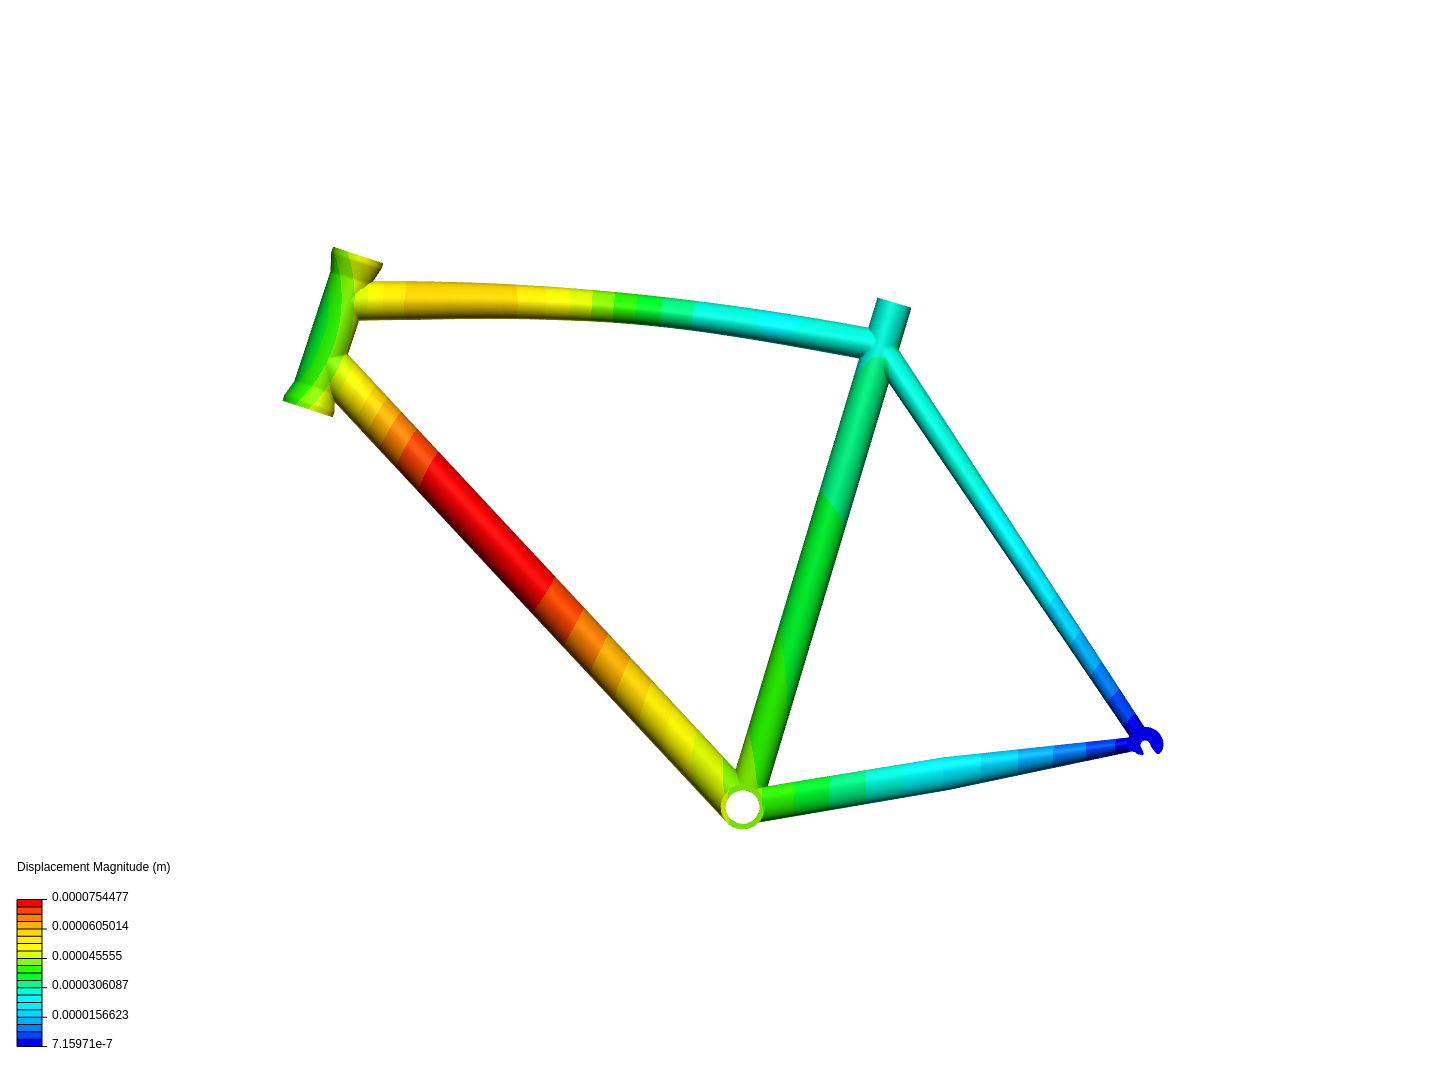 Local mesh refinement for Bike frame analysis image